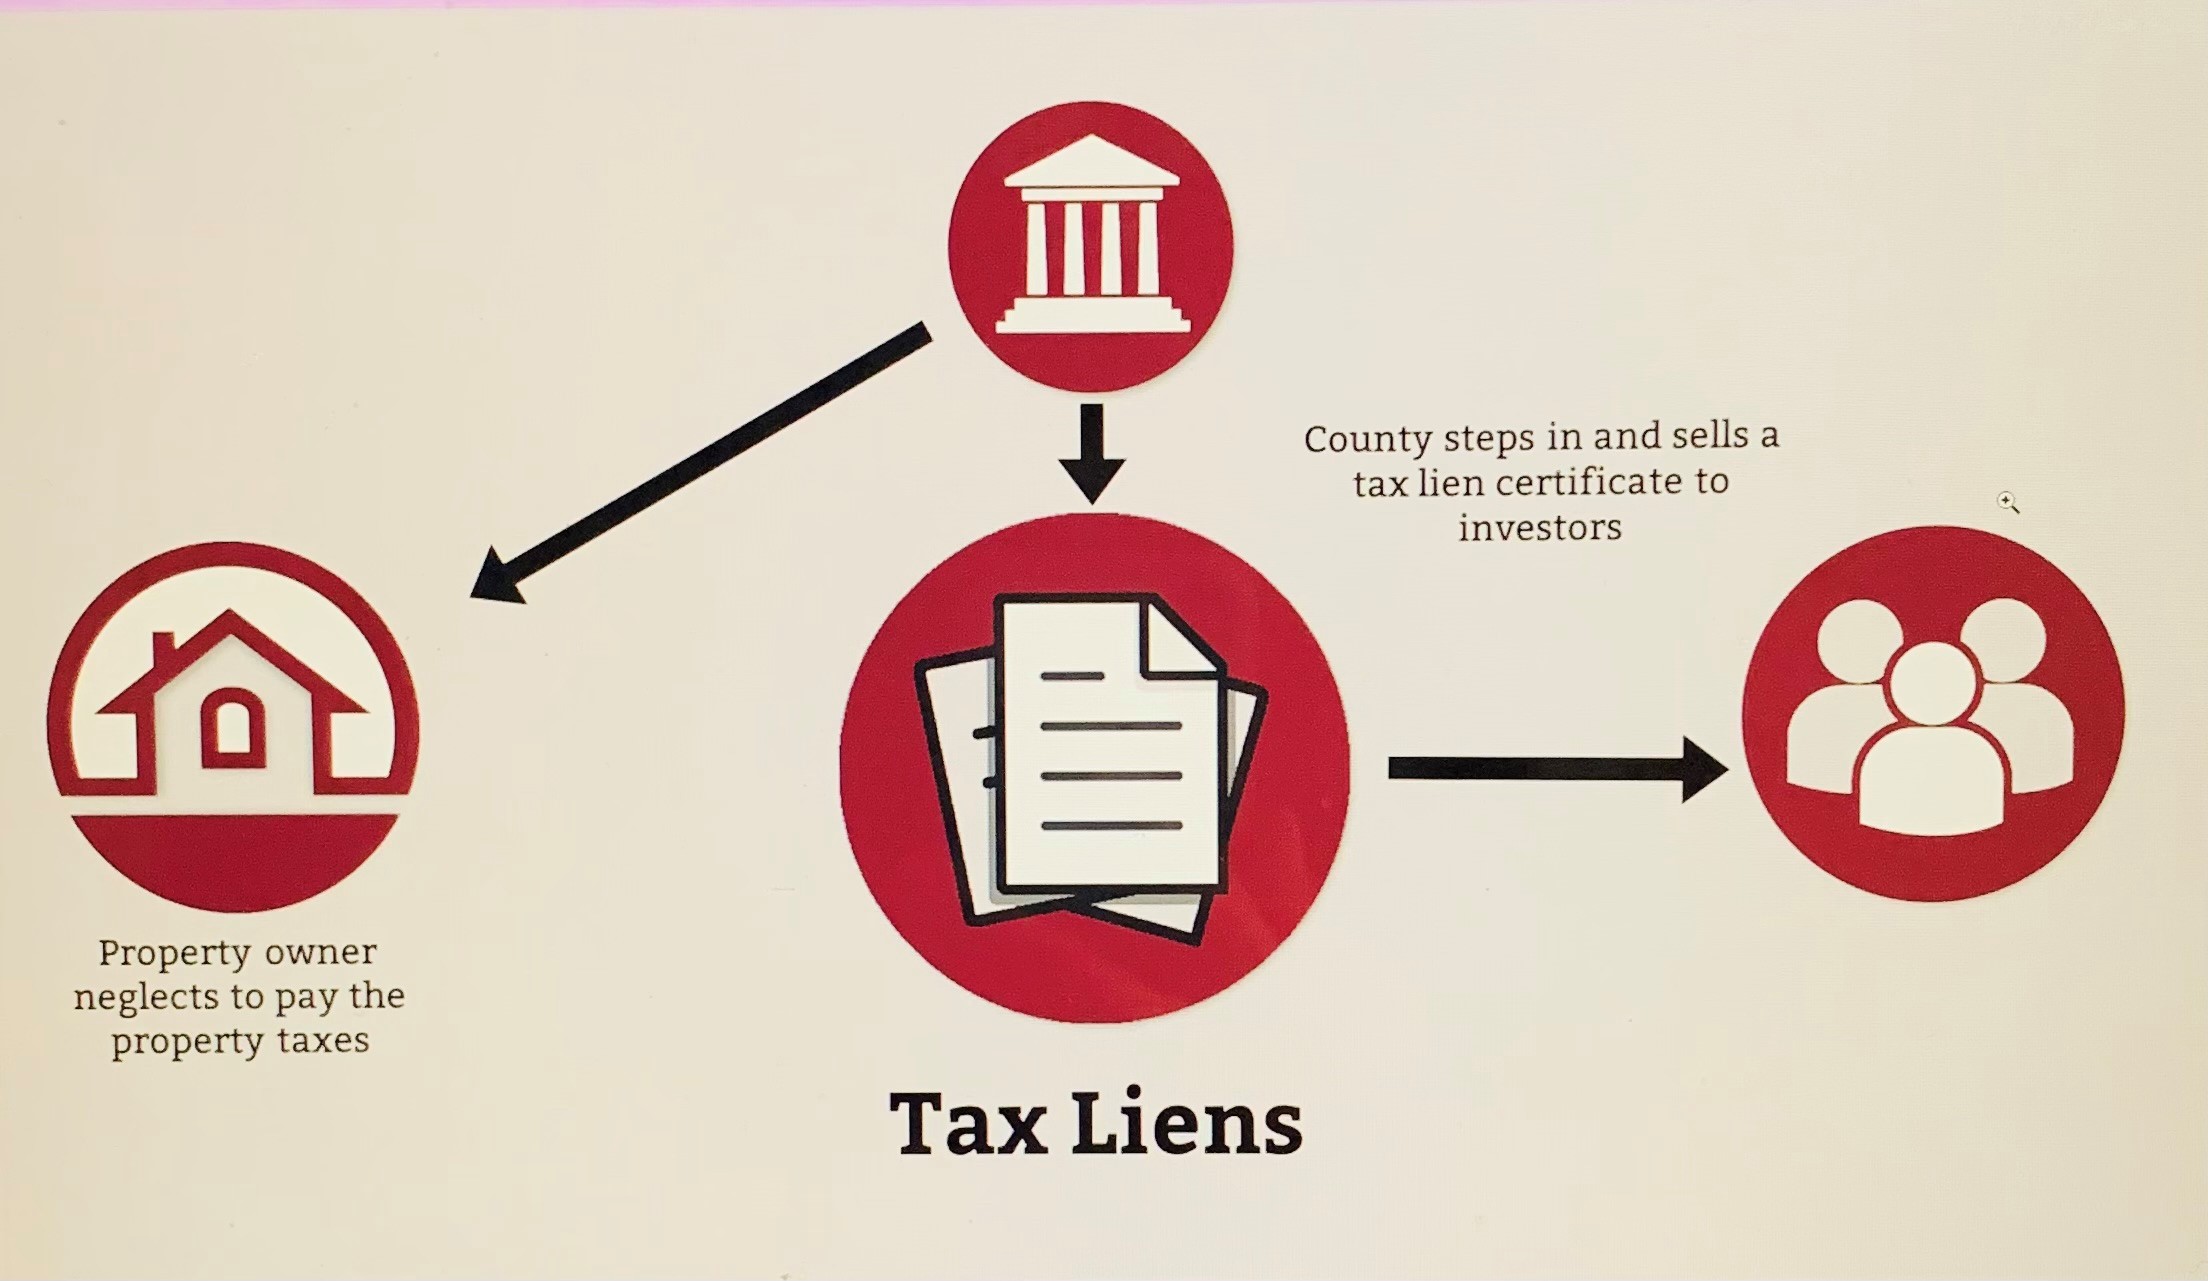 What are Tax Liens?